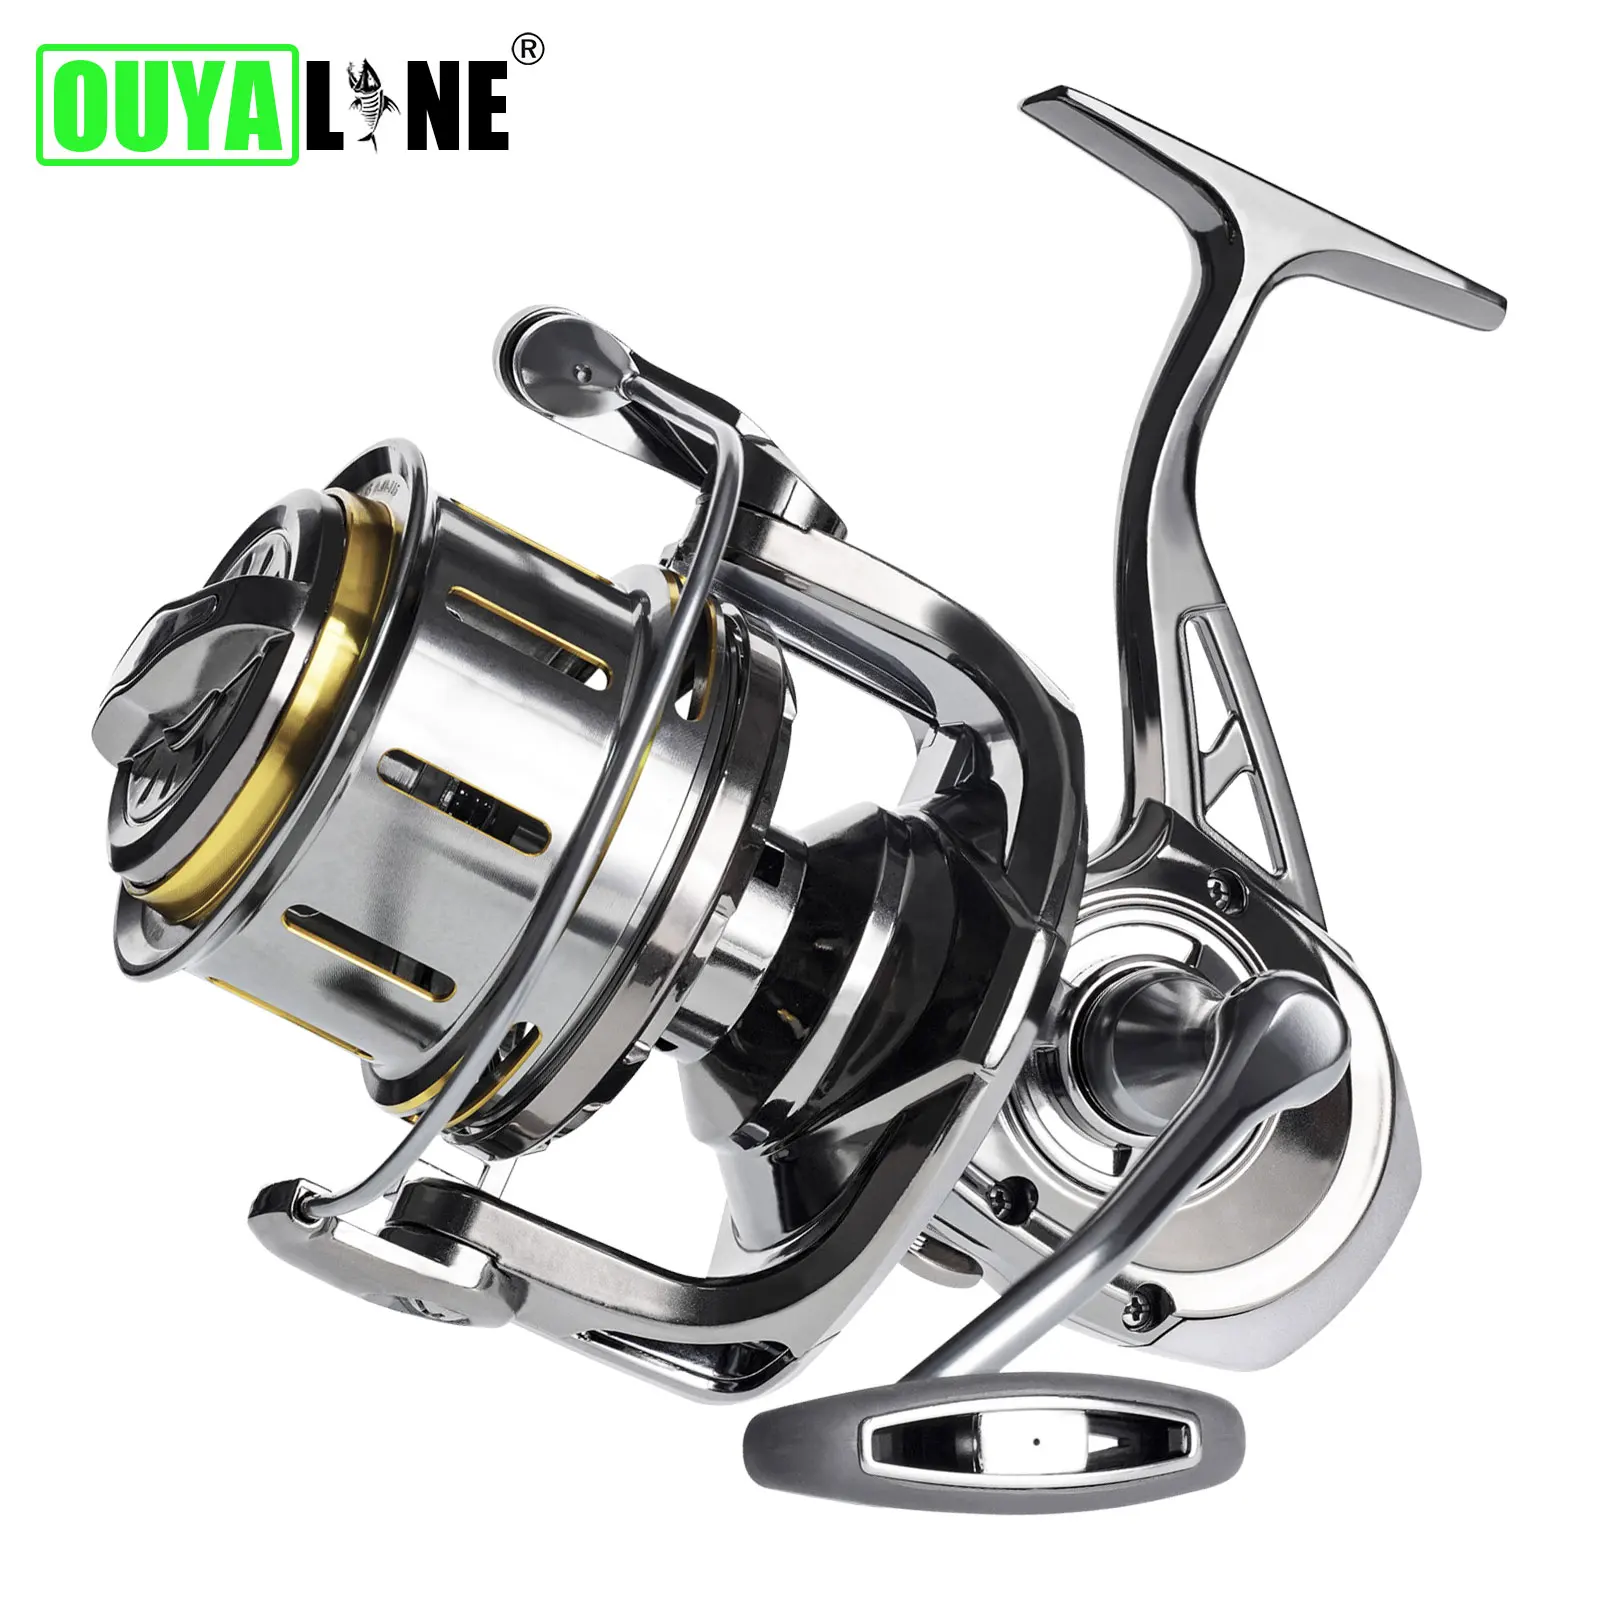 CC8000/10000/12000 Fishing Reel Cast Long Shot Power Stainless Steel  Screw-in Seawater-proof Spinning Wheel Fishing Accessories